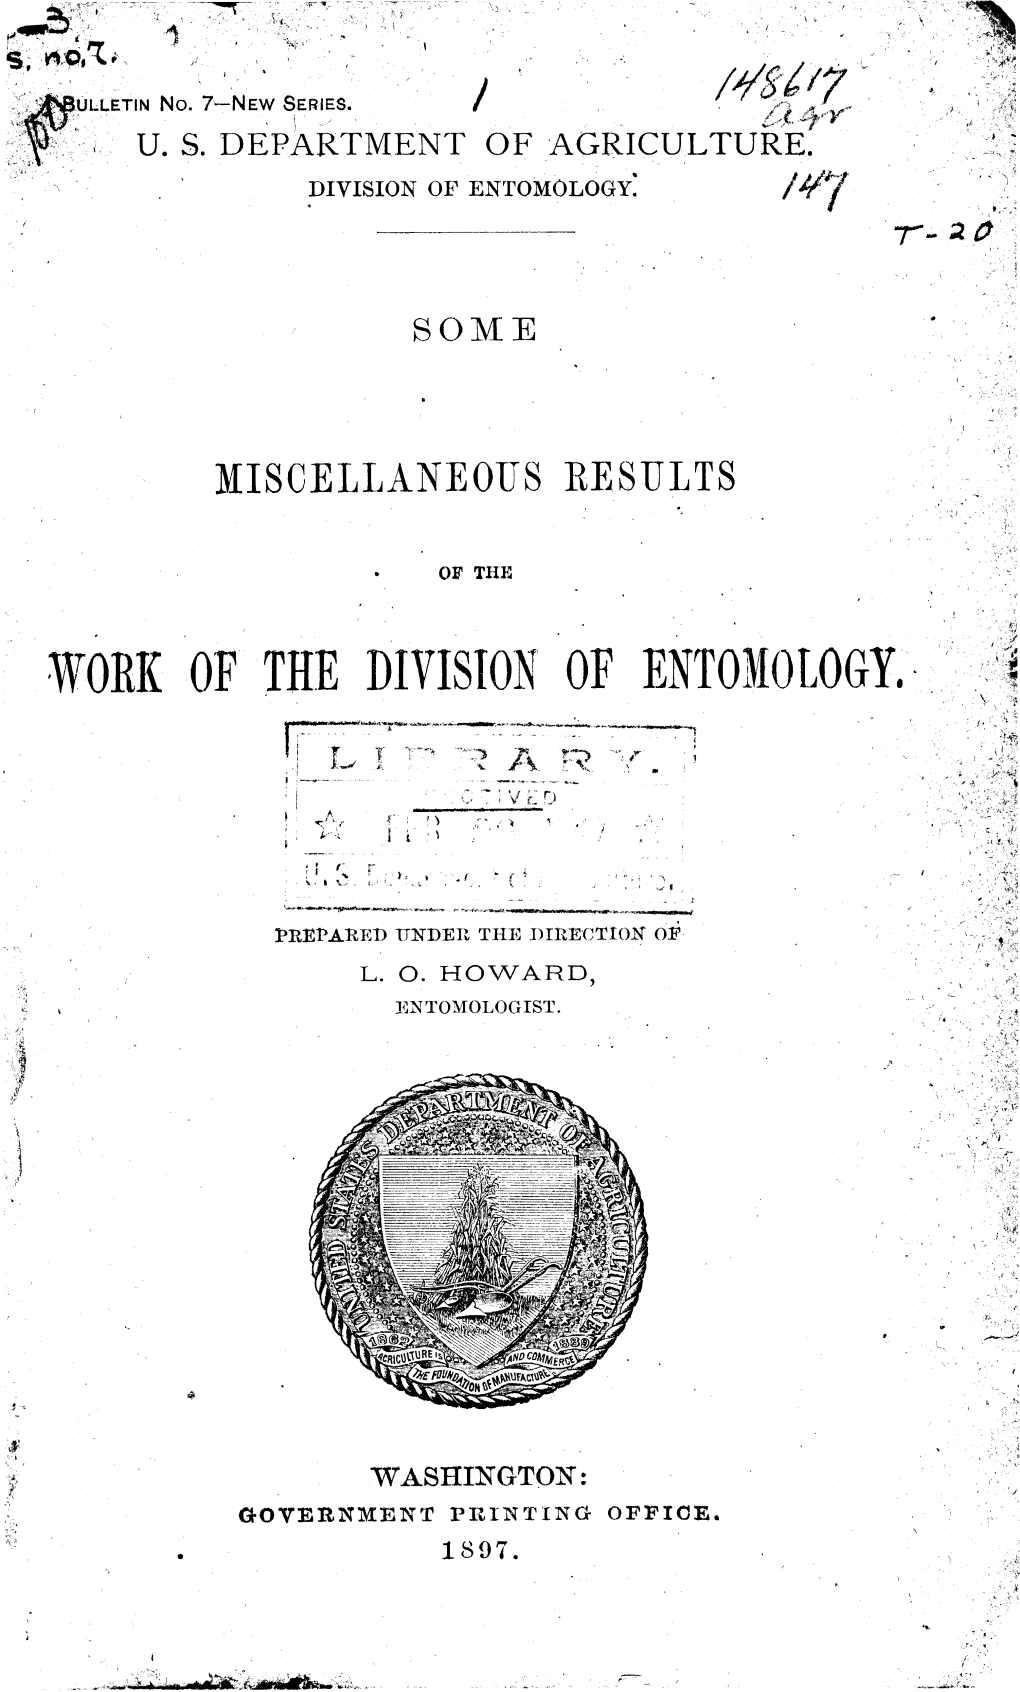 Work of the Division of Entomology